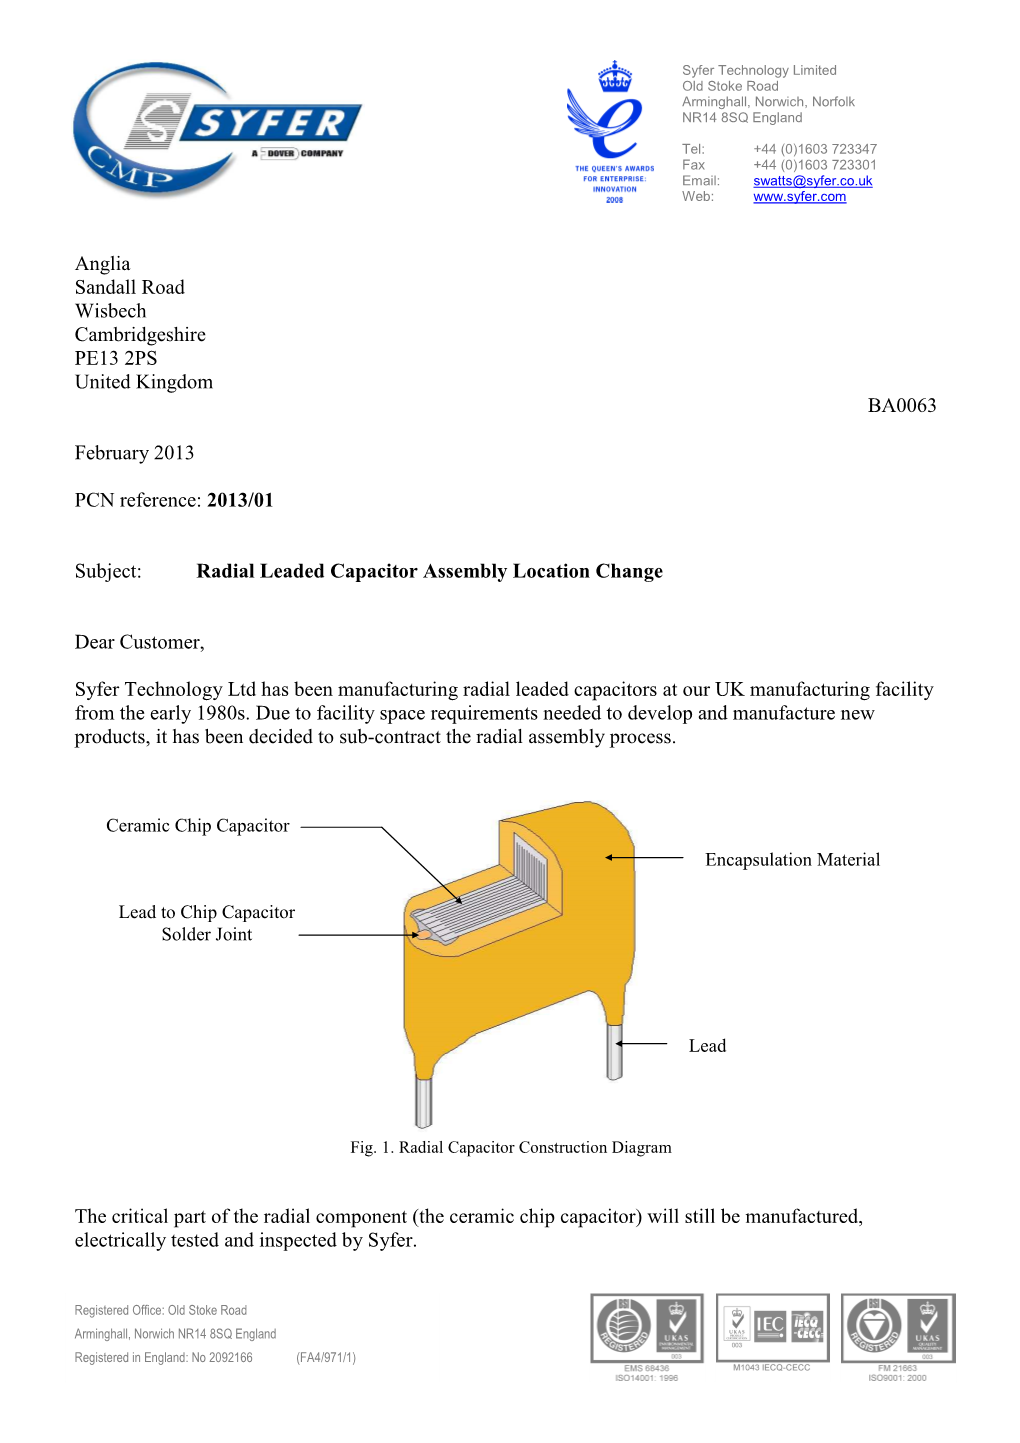 BA0063 2013-001 Radial Leaded Capacitor Assembly Location Change Notification Jan 13 Final